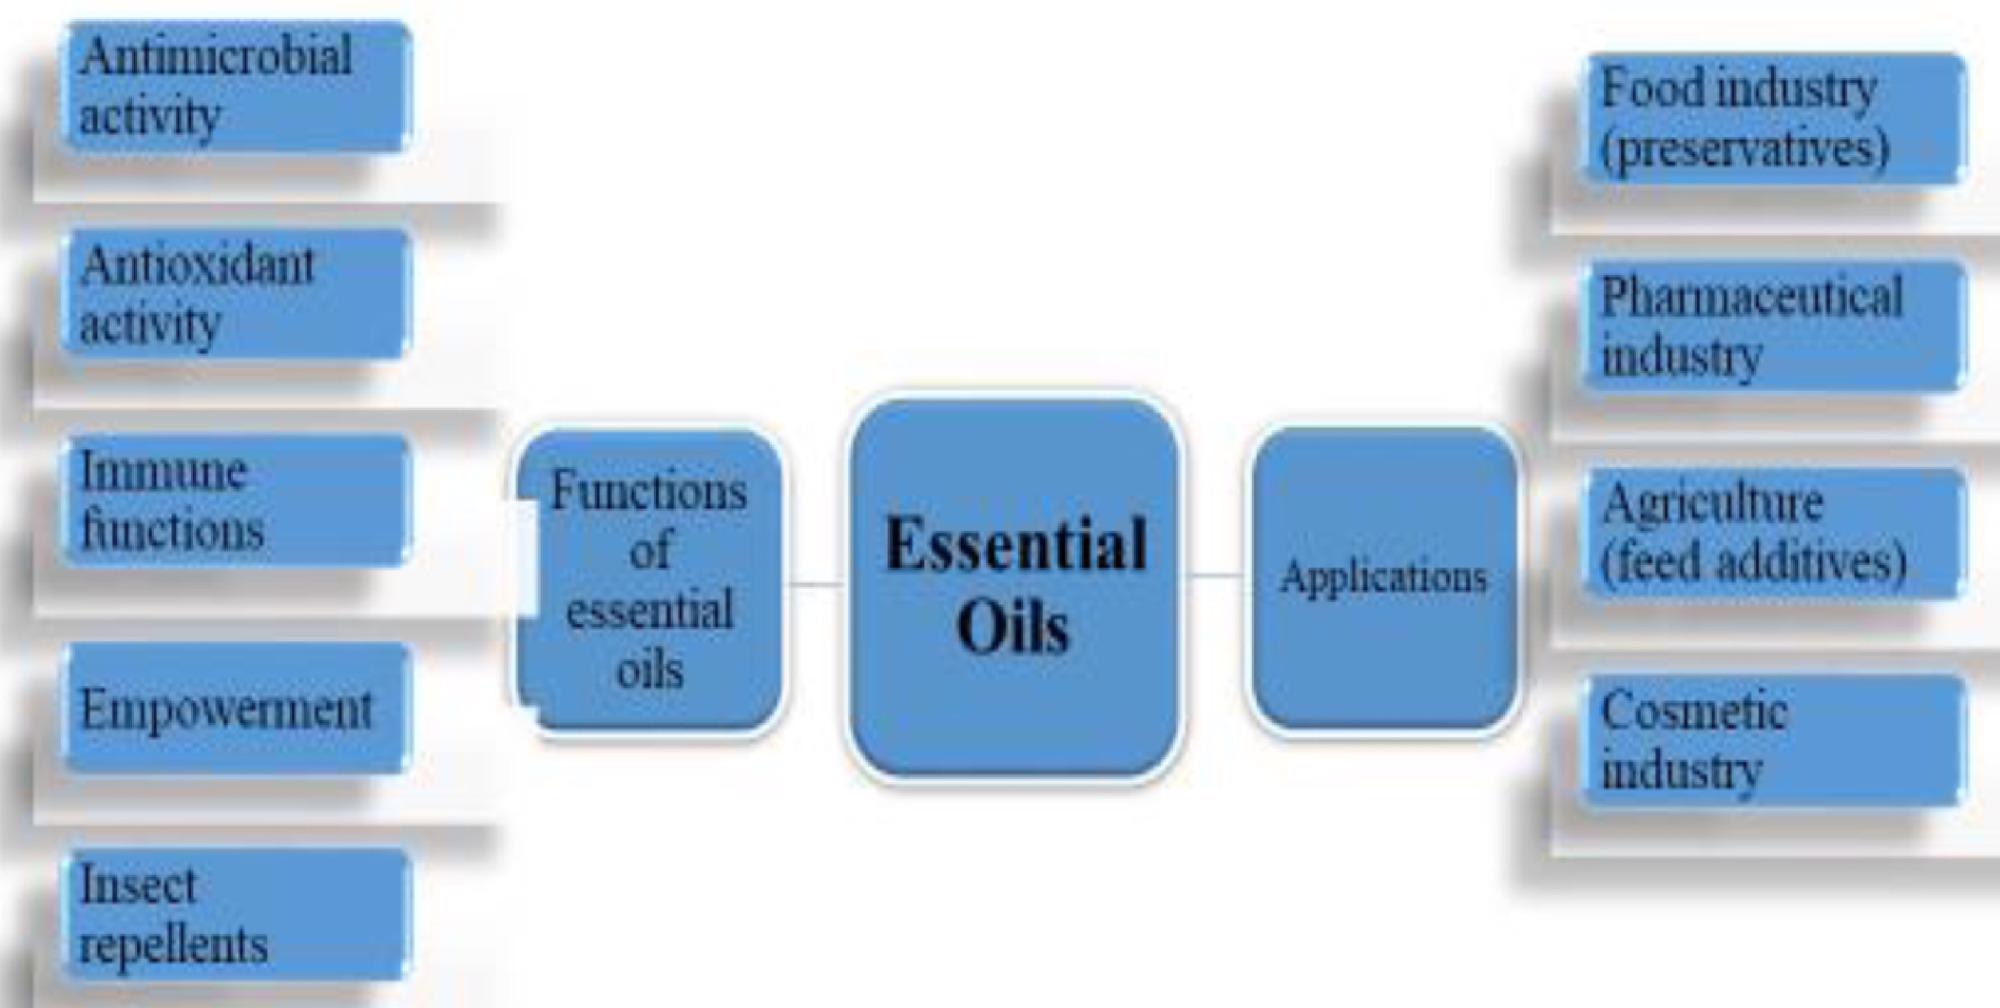 Various industrial applications of essential oils.